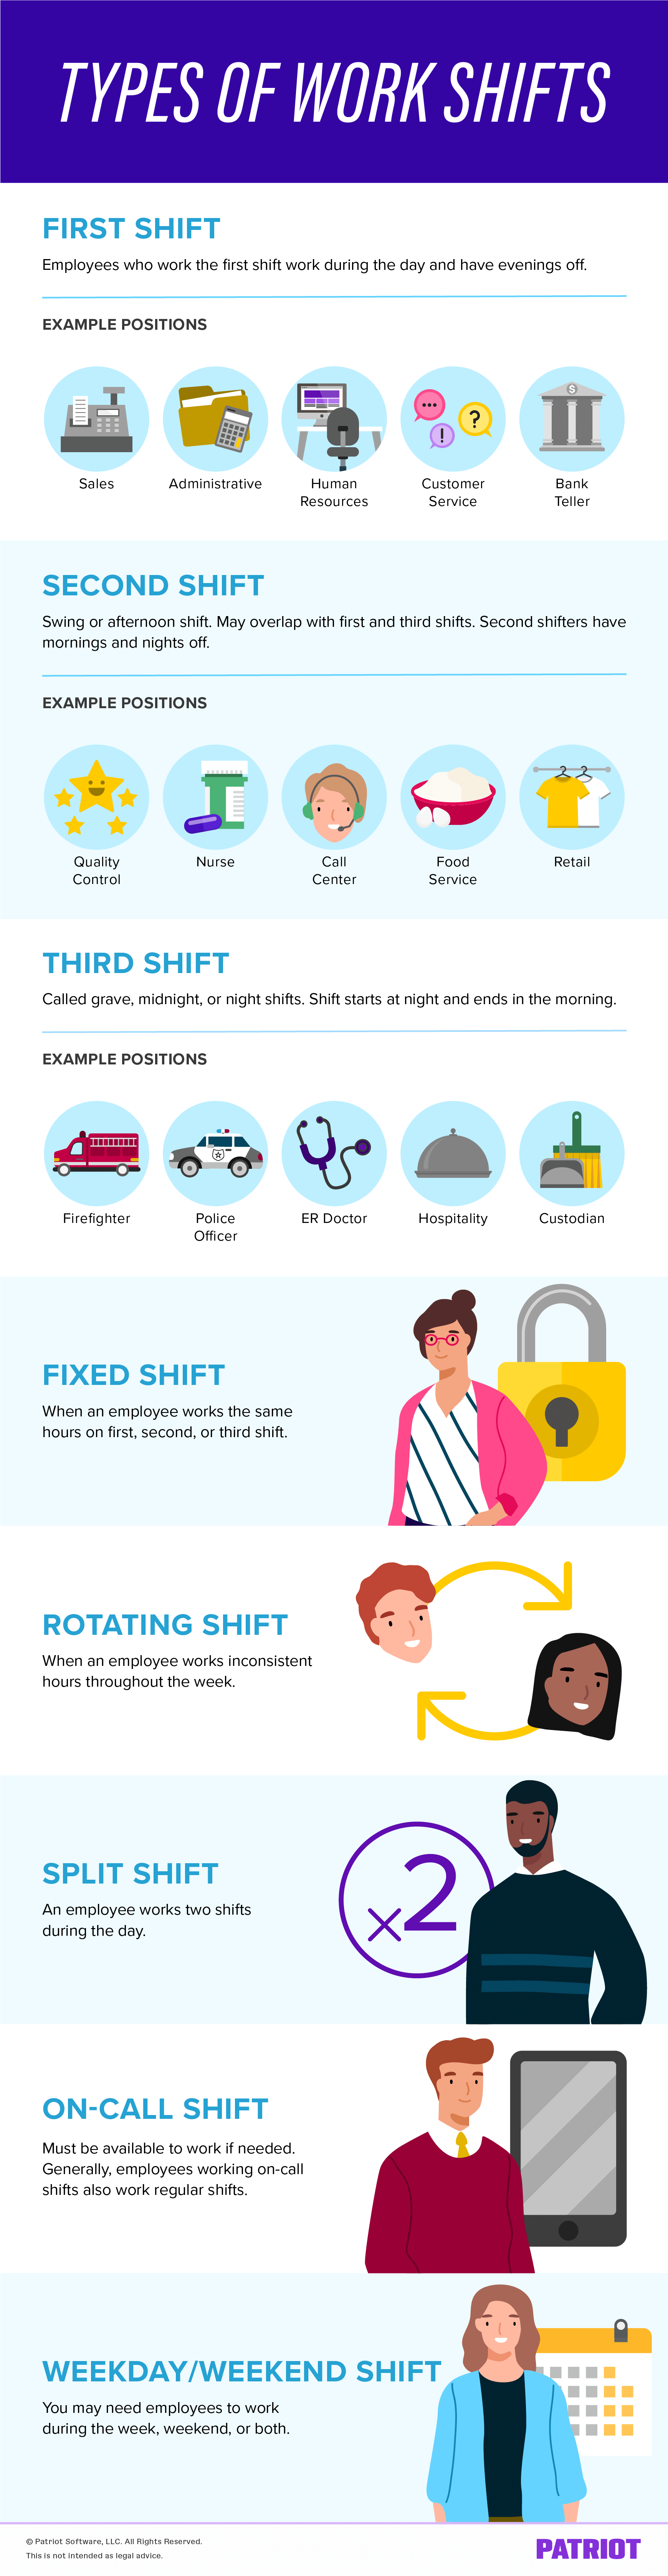 types of work shifts infographic (first, second, third, fixed, rotating, split, on-call, and weekday/weekend shift)